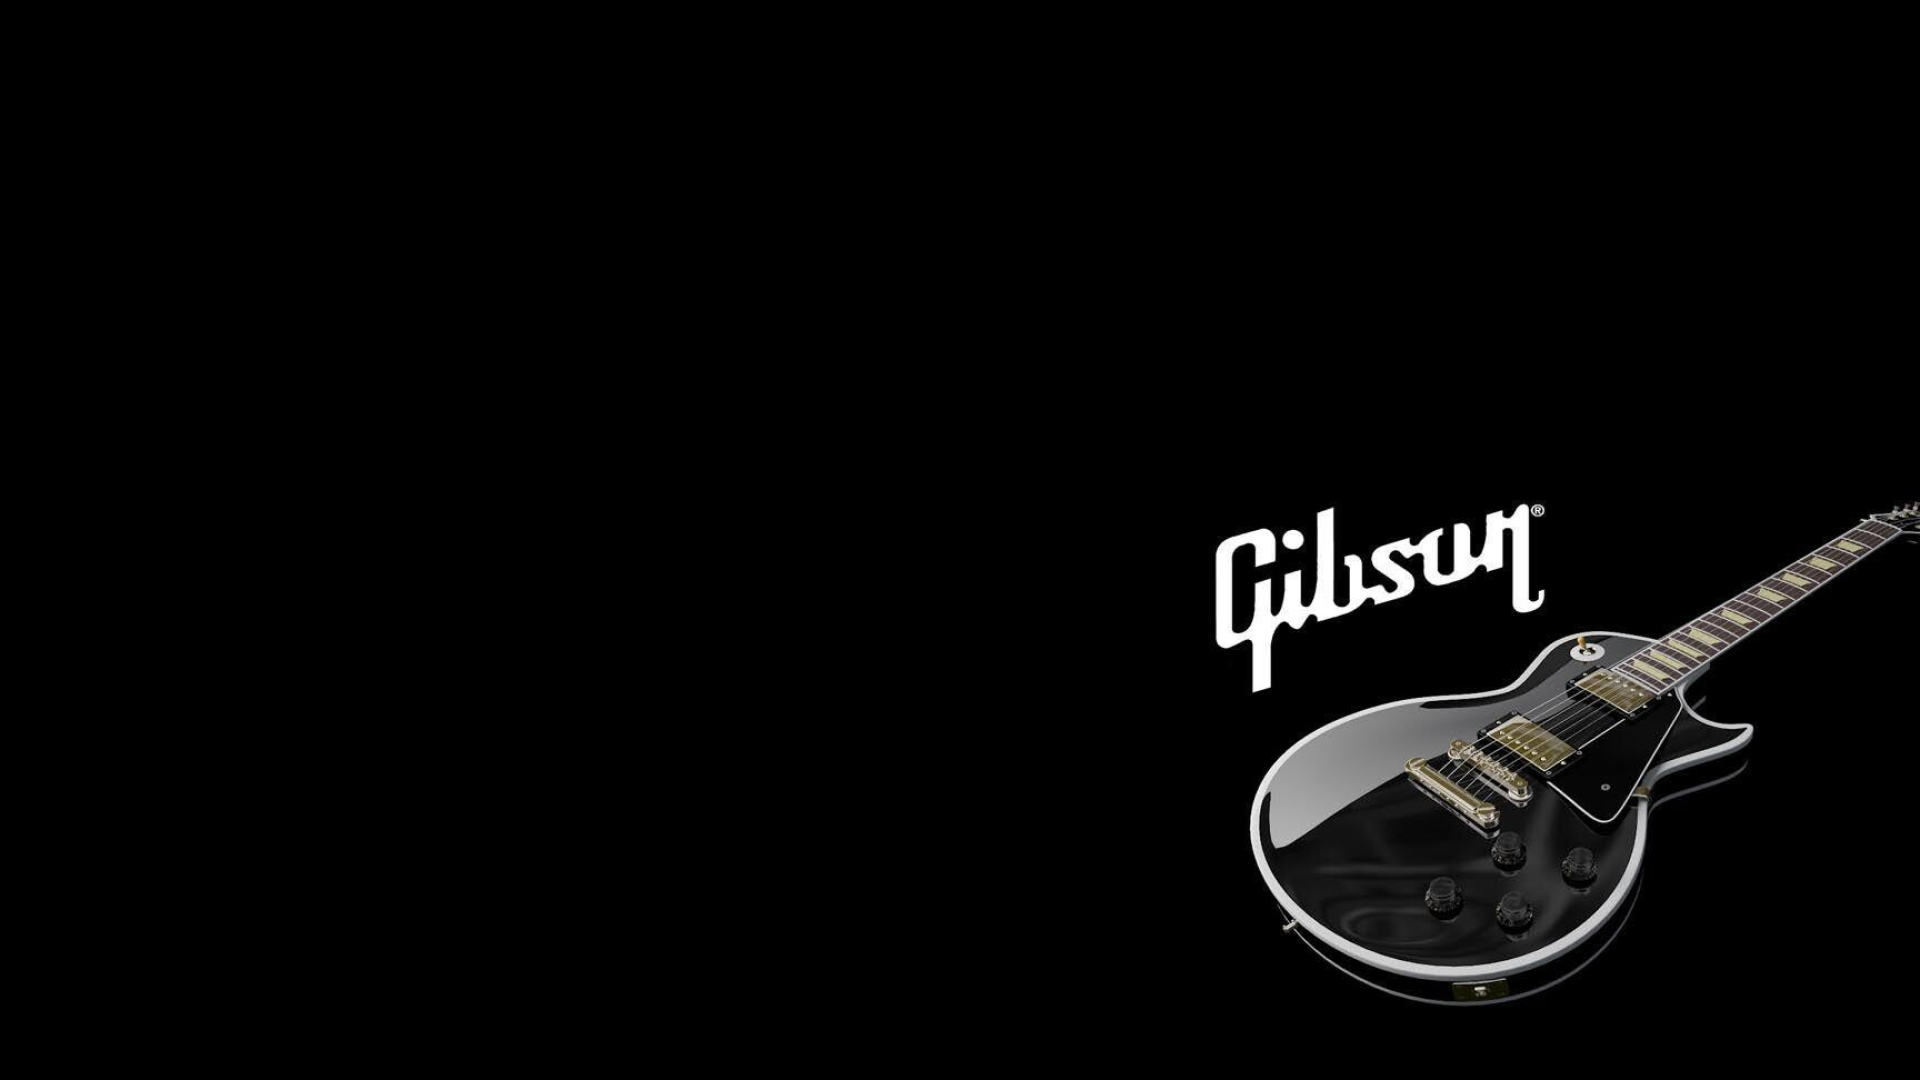 Gibson Guitar: Les Paul, Orville Gibson founded the company in 1902. 1920x1080 Full HD Background.